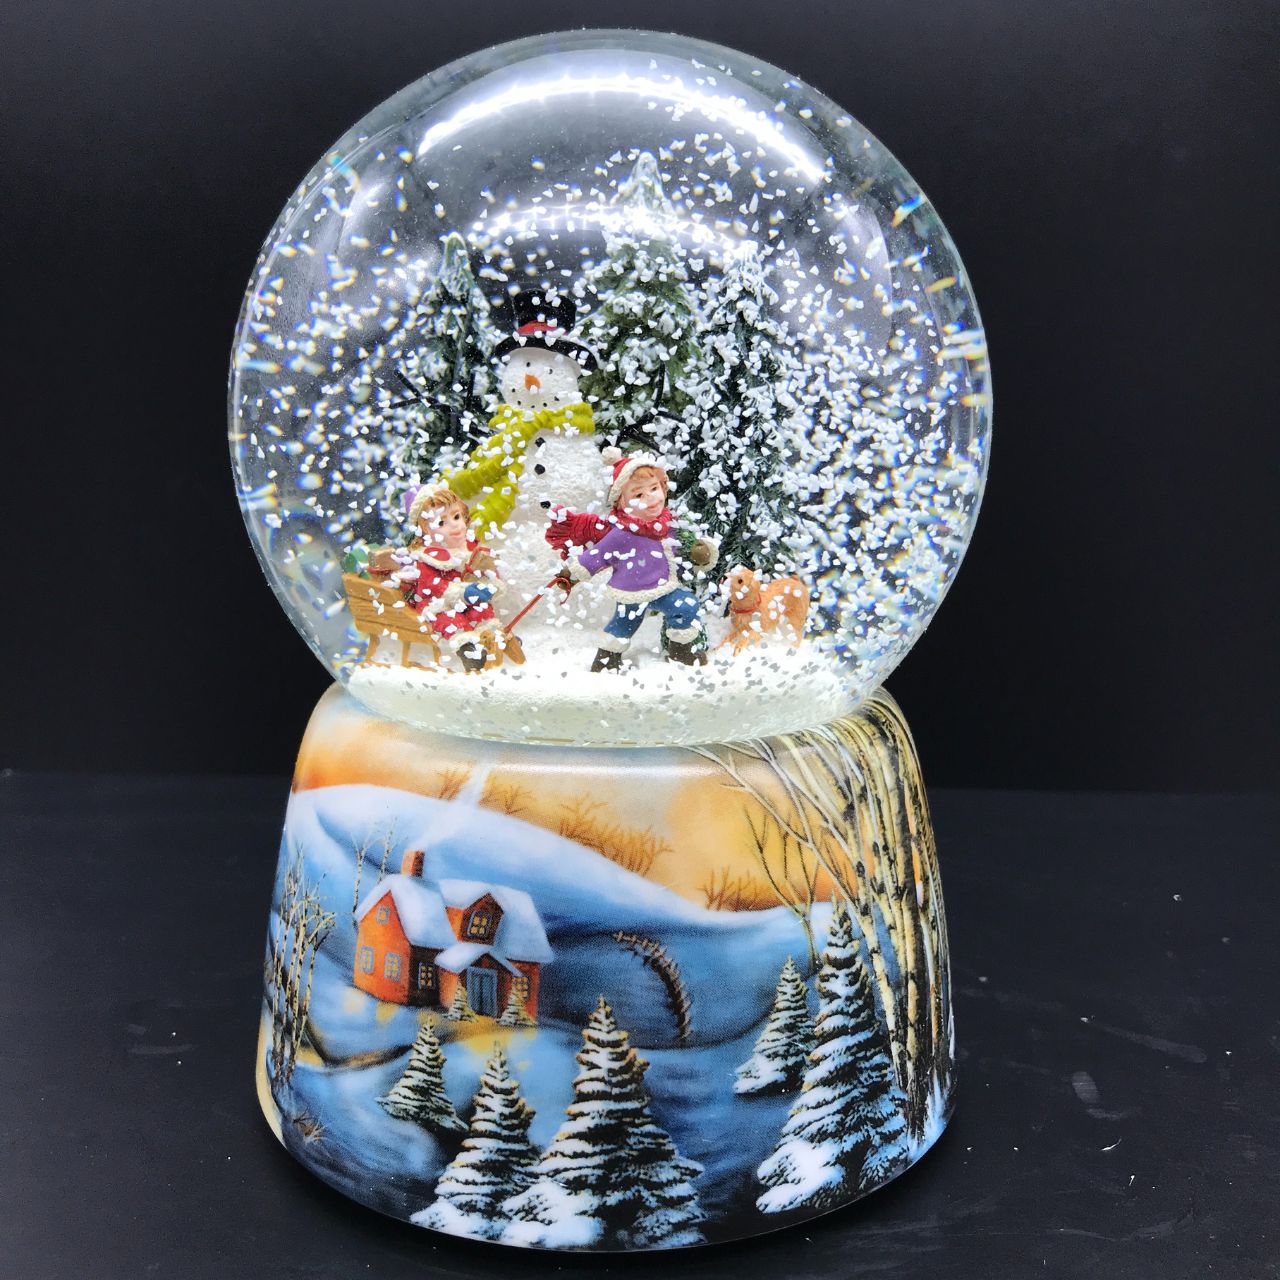 Music Box World Snow Globe Building a Snowman  Snow globe build a snowman. In the ball full of snow, two children with their sled pass by their snowman. Small snowy pine trees decorate the scene. The base is painted with snow-covered forest and village scenes.